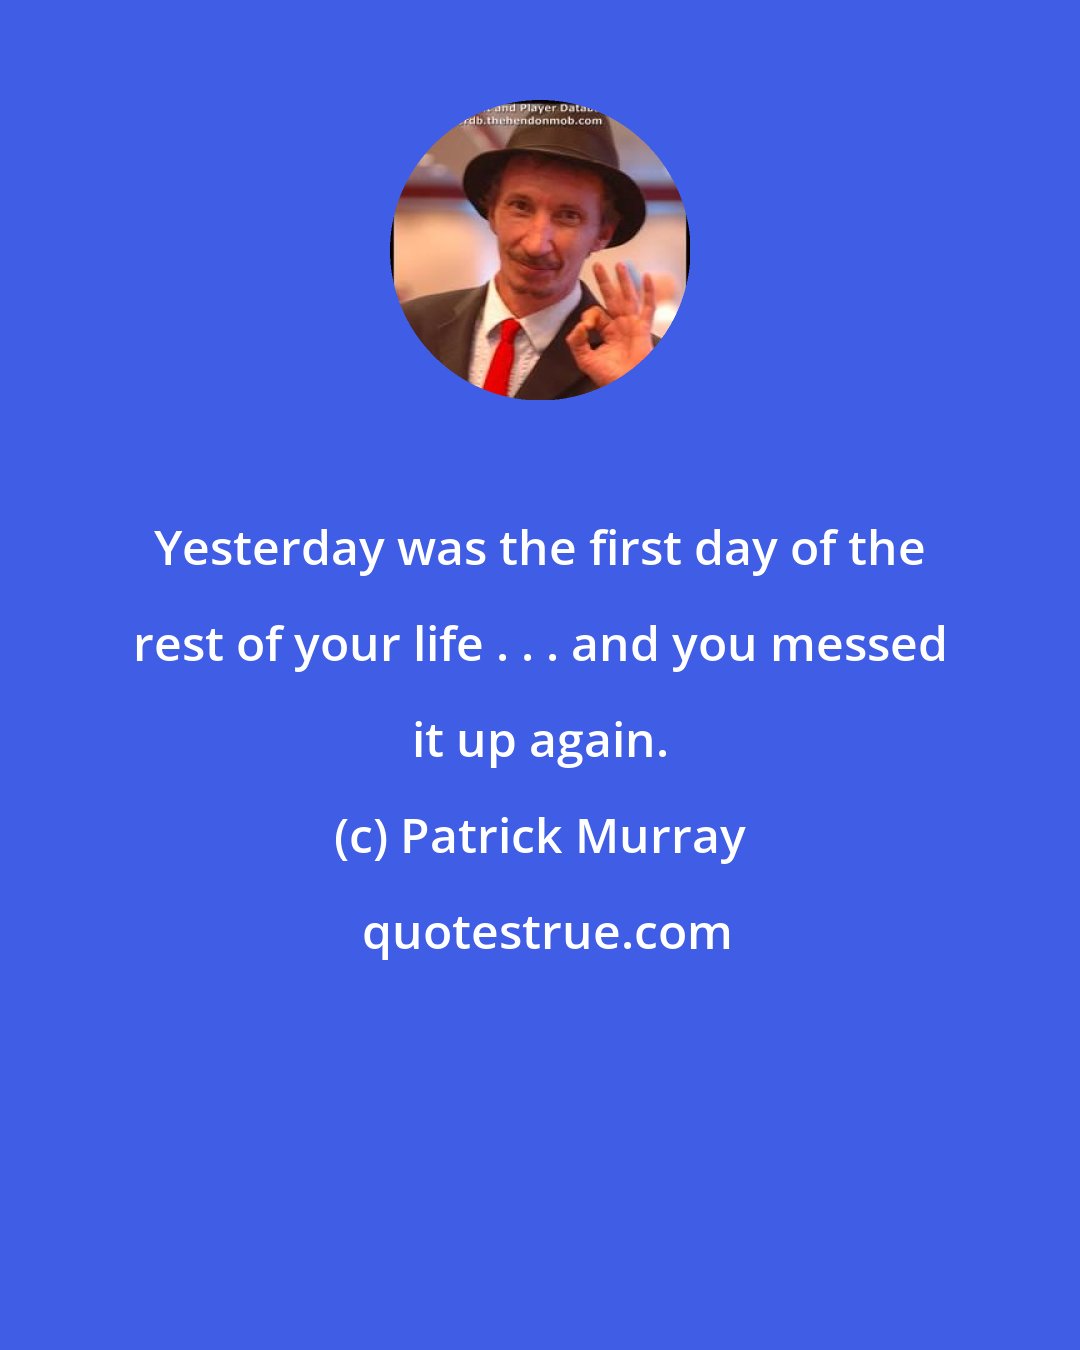 Patrick Murray: Yesterday was the first day of the rest of your life . . . and you messed it up again.